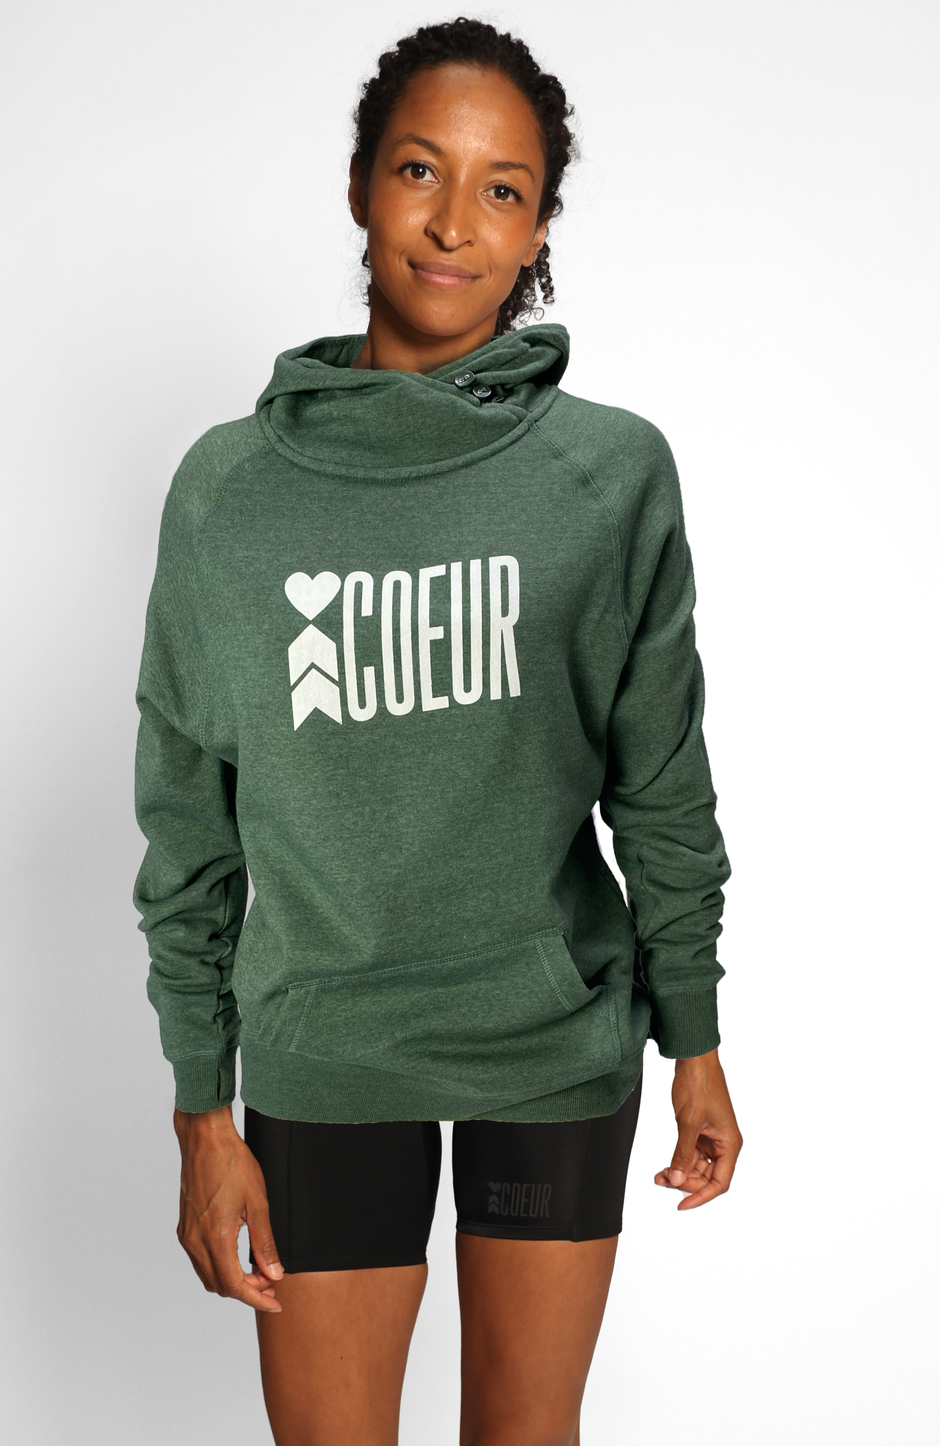 New Arrivals - Sports Clothings and Accessories – Coeur Sports